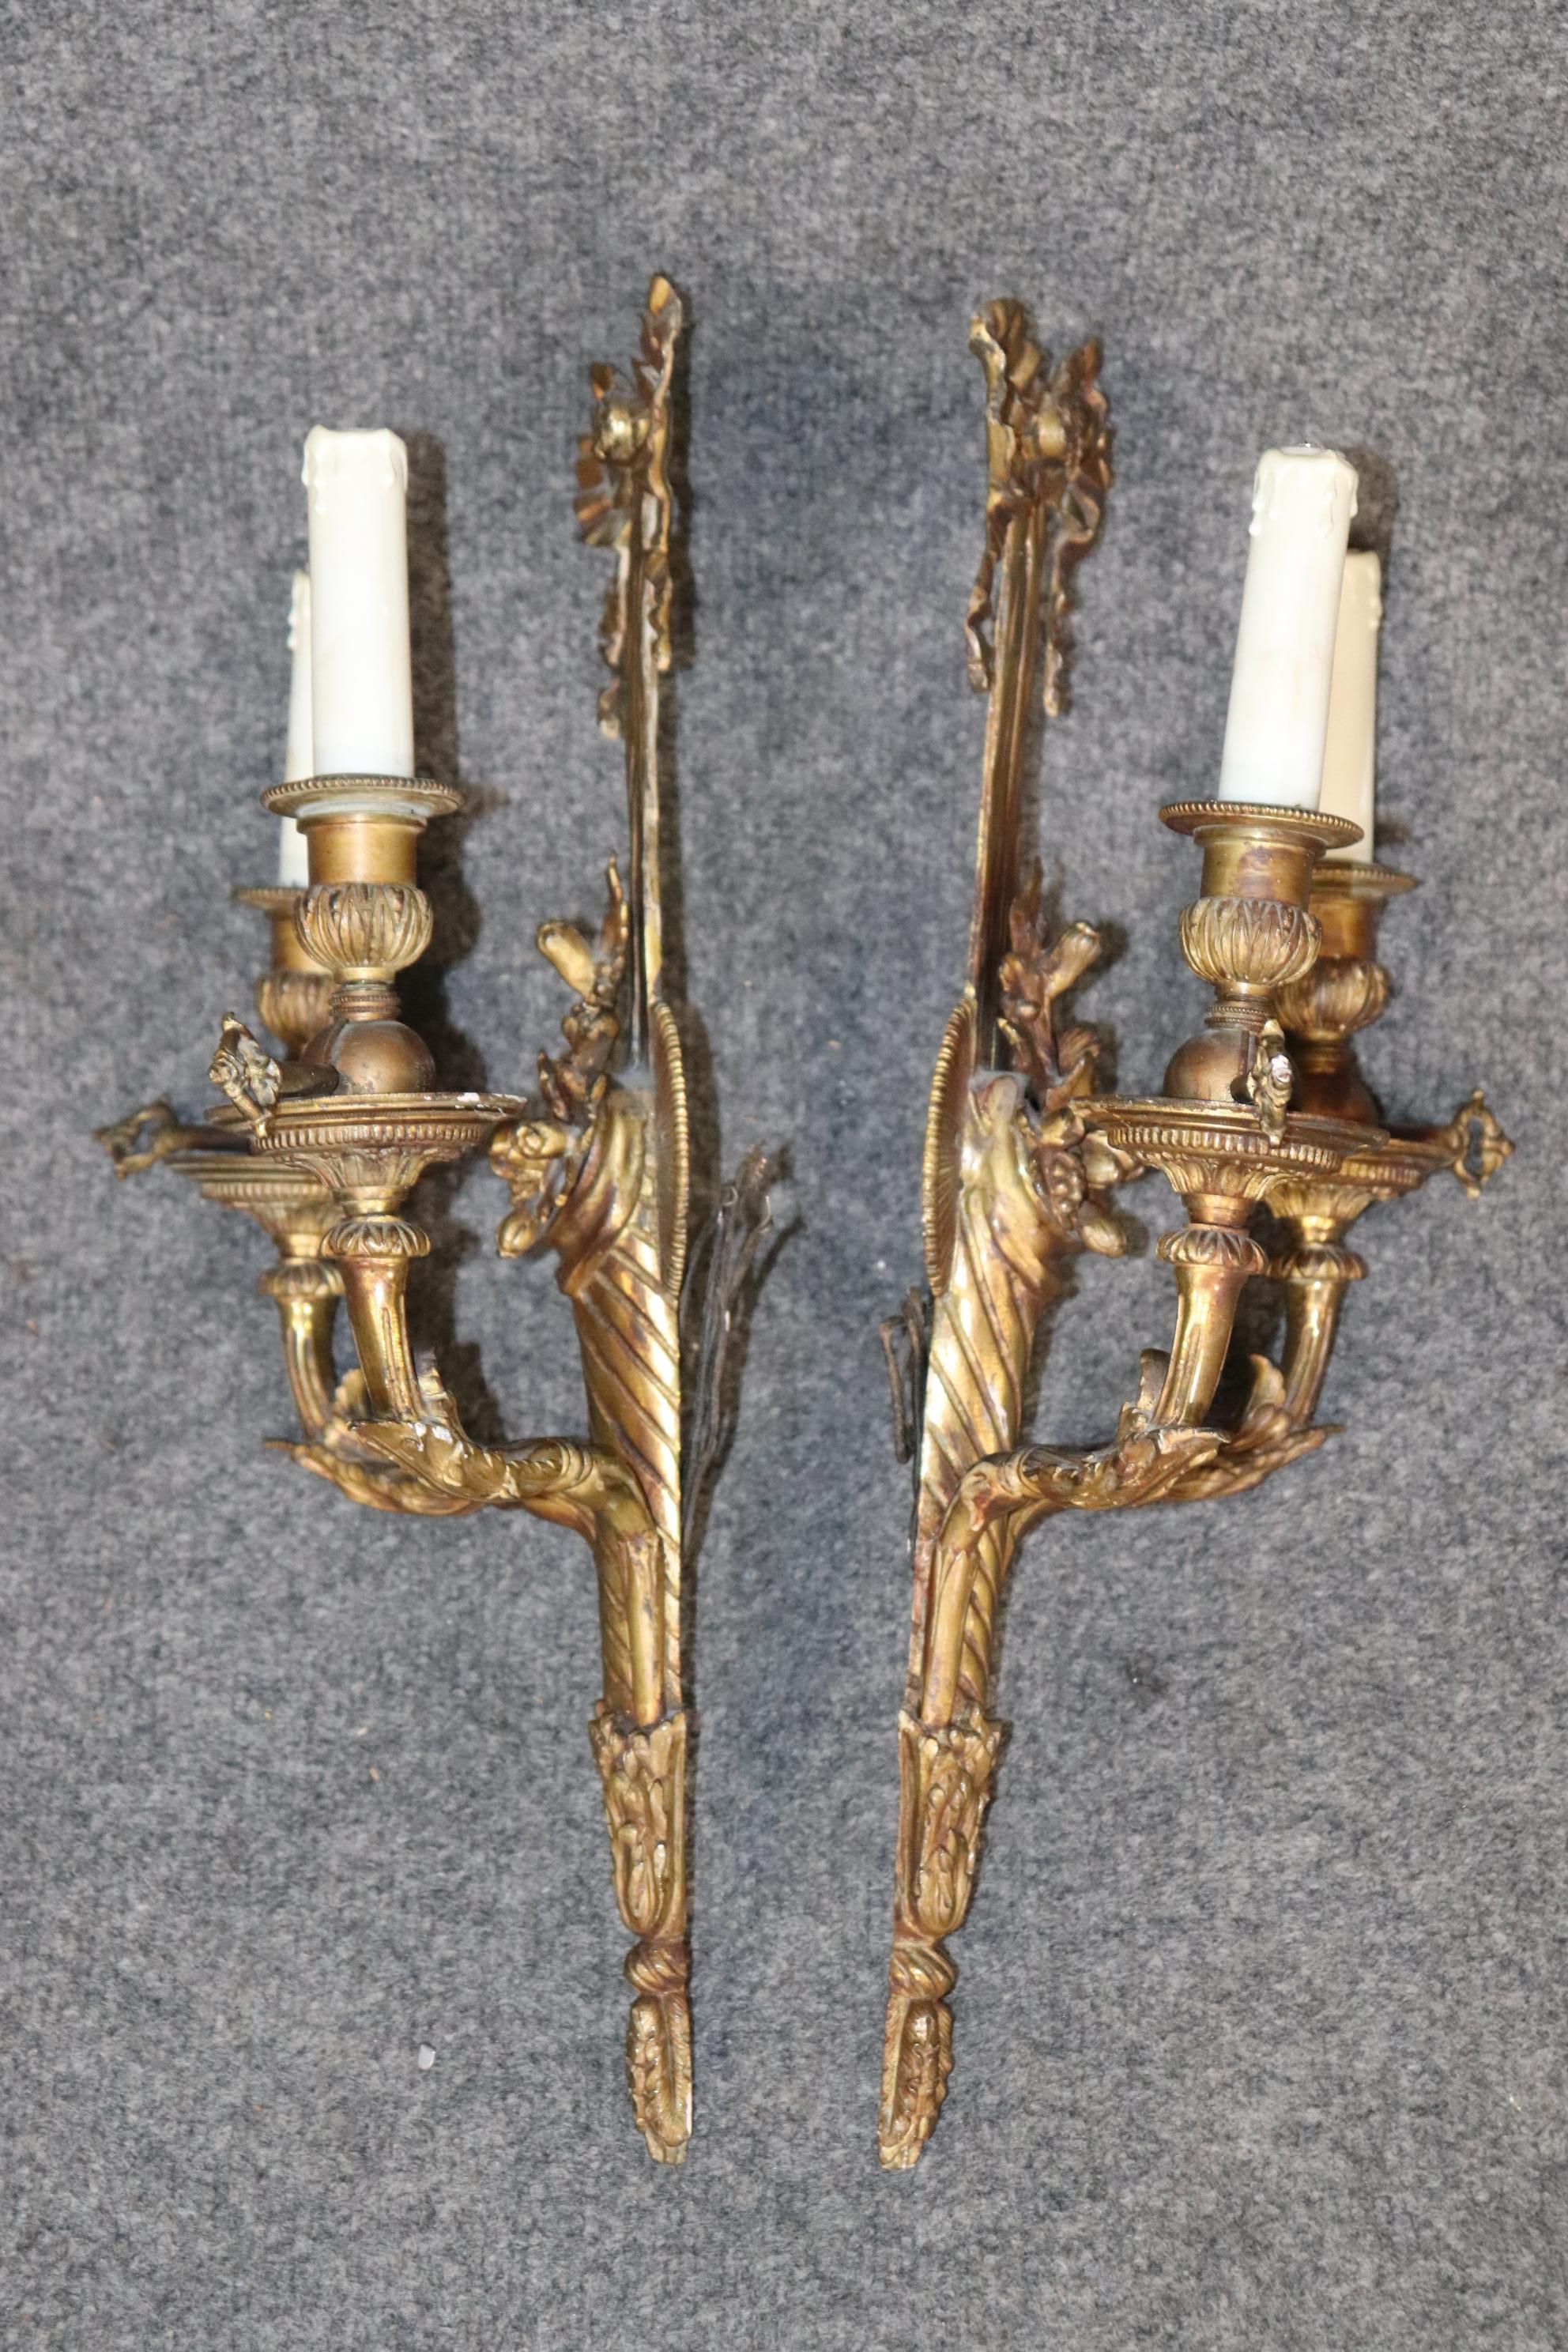 Dimensions- H: 19in W: 11 1/2in D: 5 1/4in
This Pair Antique Louis XV Style French Brass Wall Sconces are made of the highest quality and are a fine example early 20th century french decor. This pair is from the 1920's and is made of brass. If you